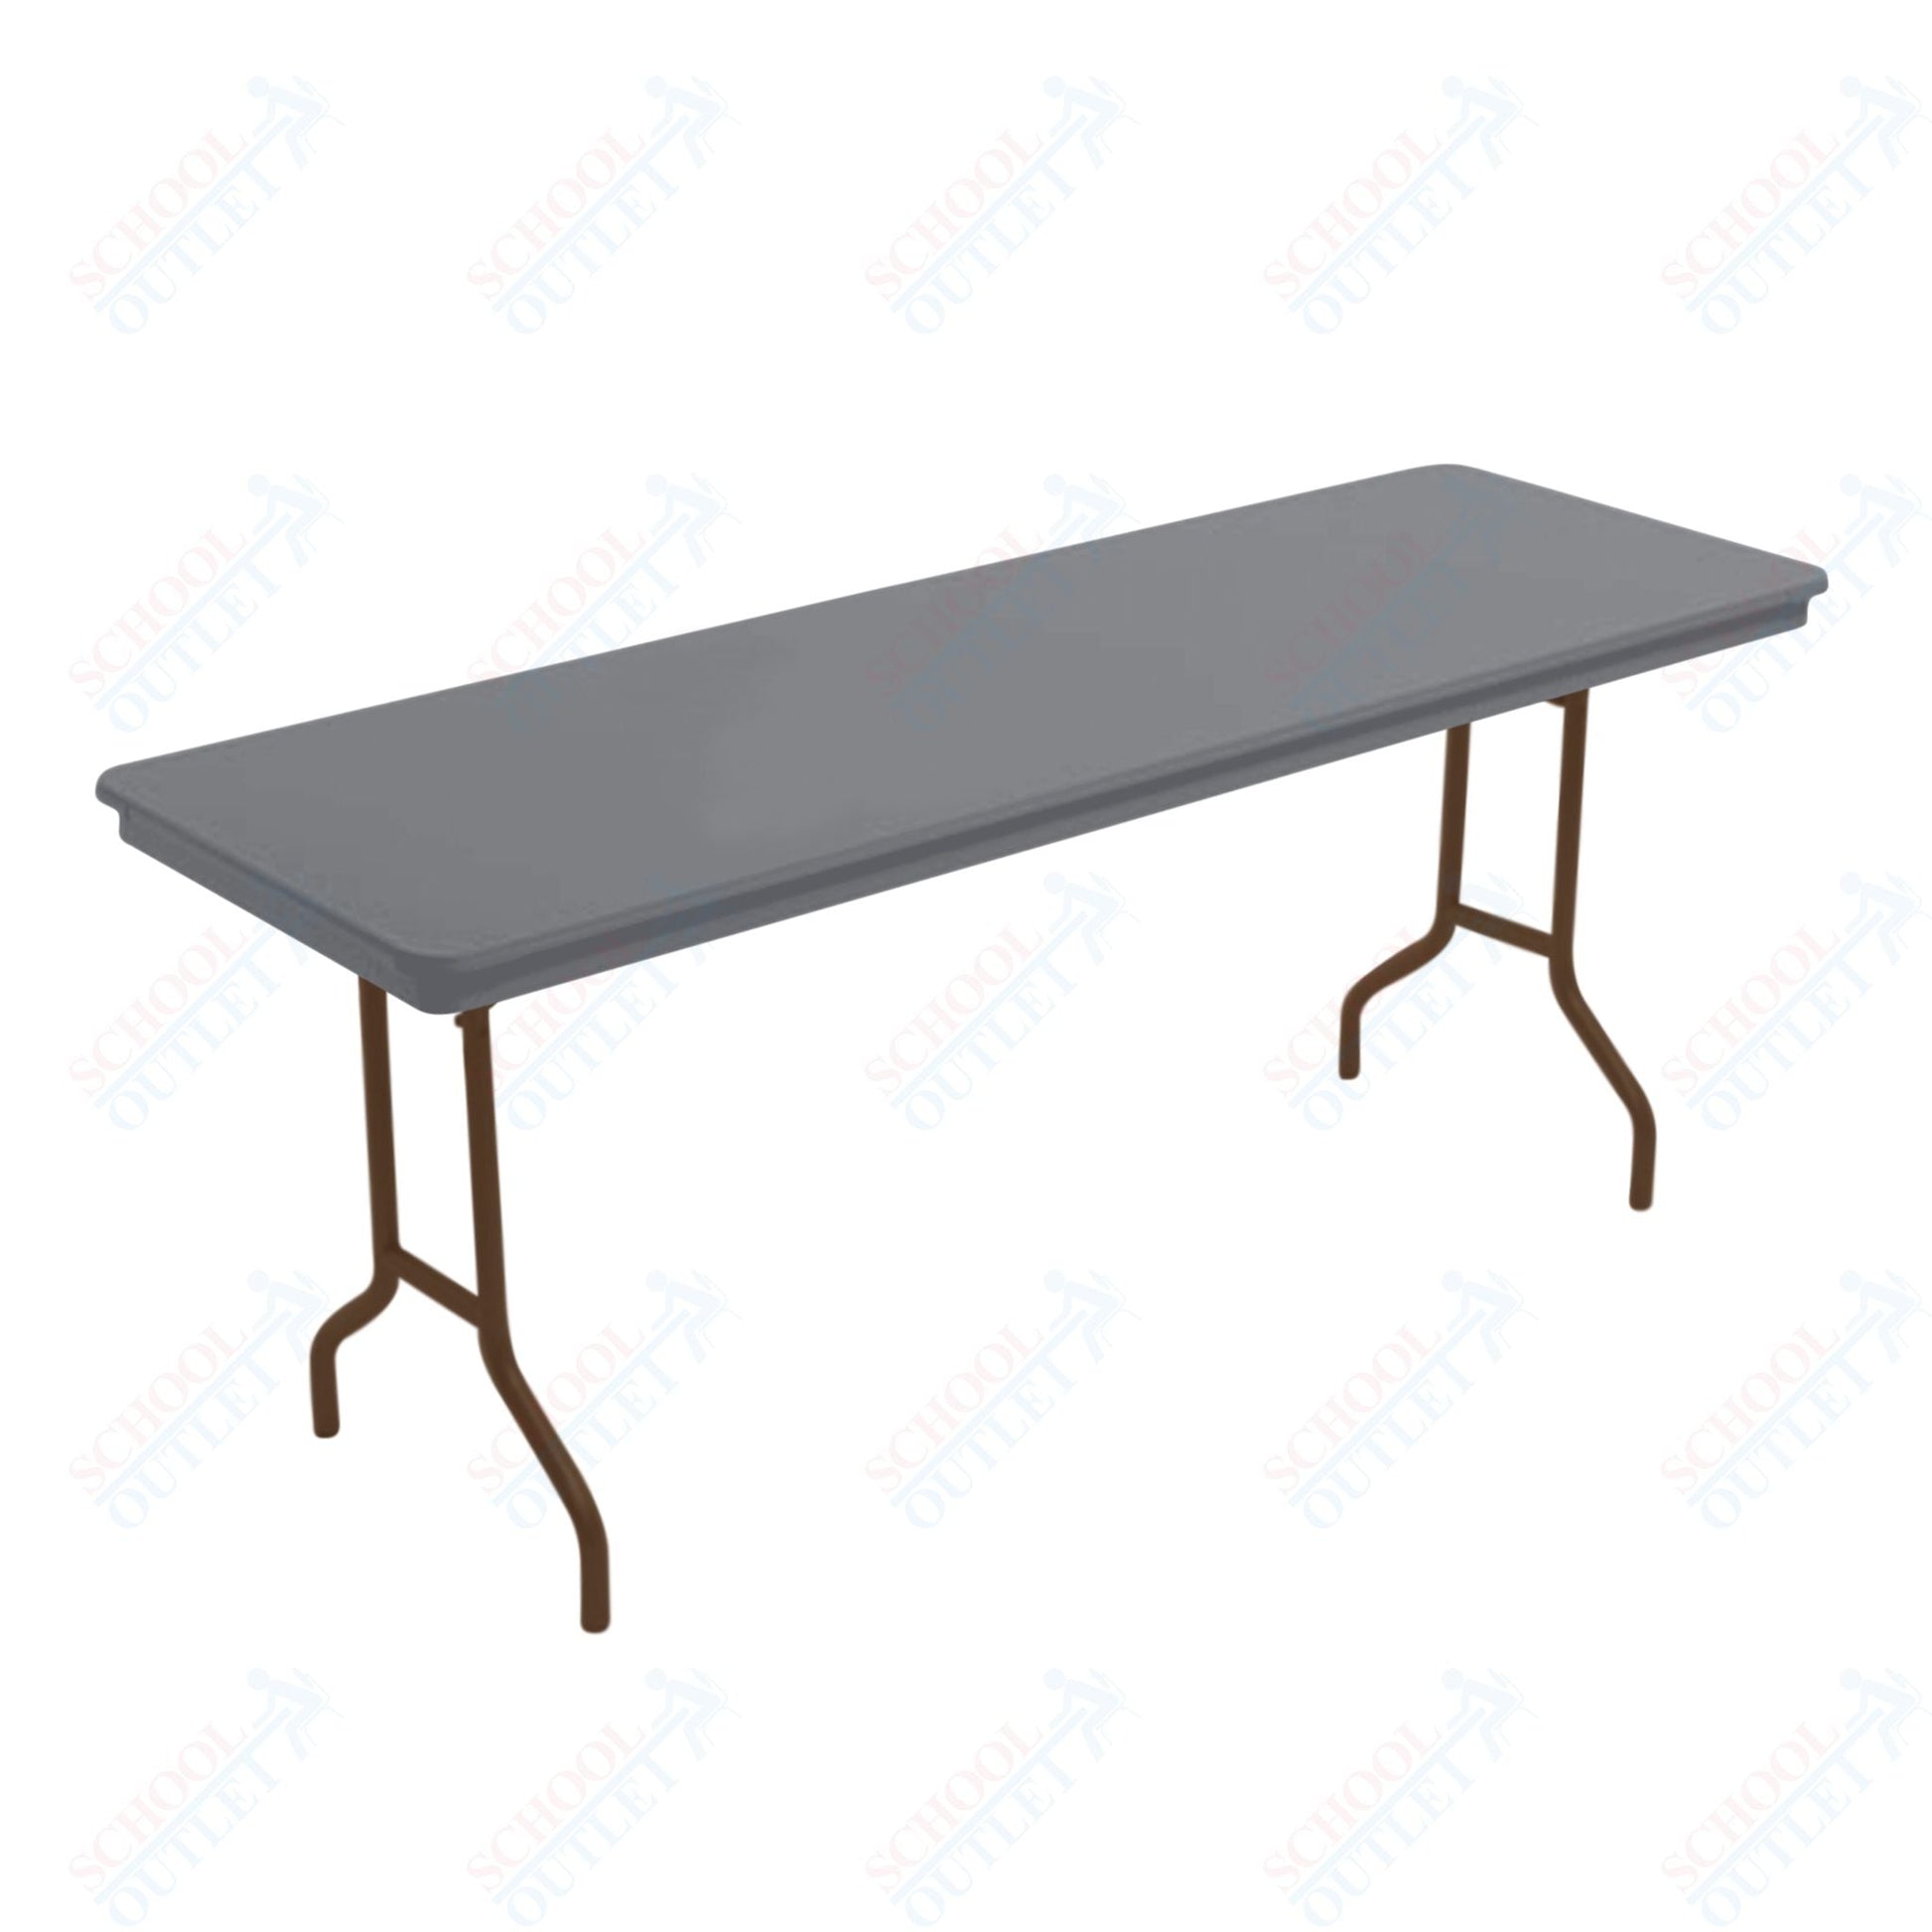 AmTab Dynalite Featherweight Heavy - Duty ABS Plastic Folding Table - Rectangle - 30"W x 96"L x 29"H (AmTab AMT - 308DL) - SchoolOutlet